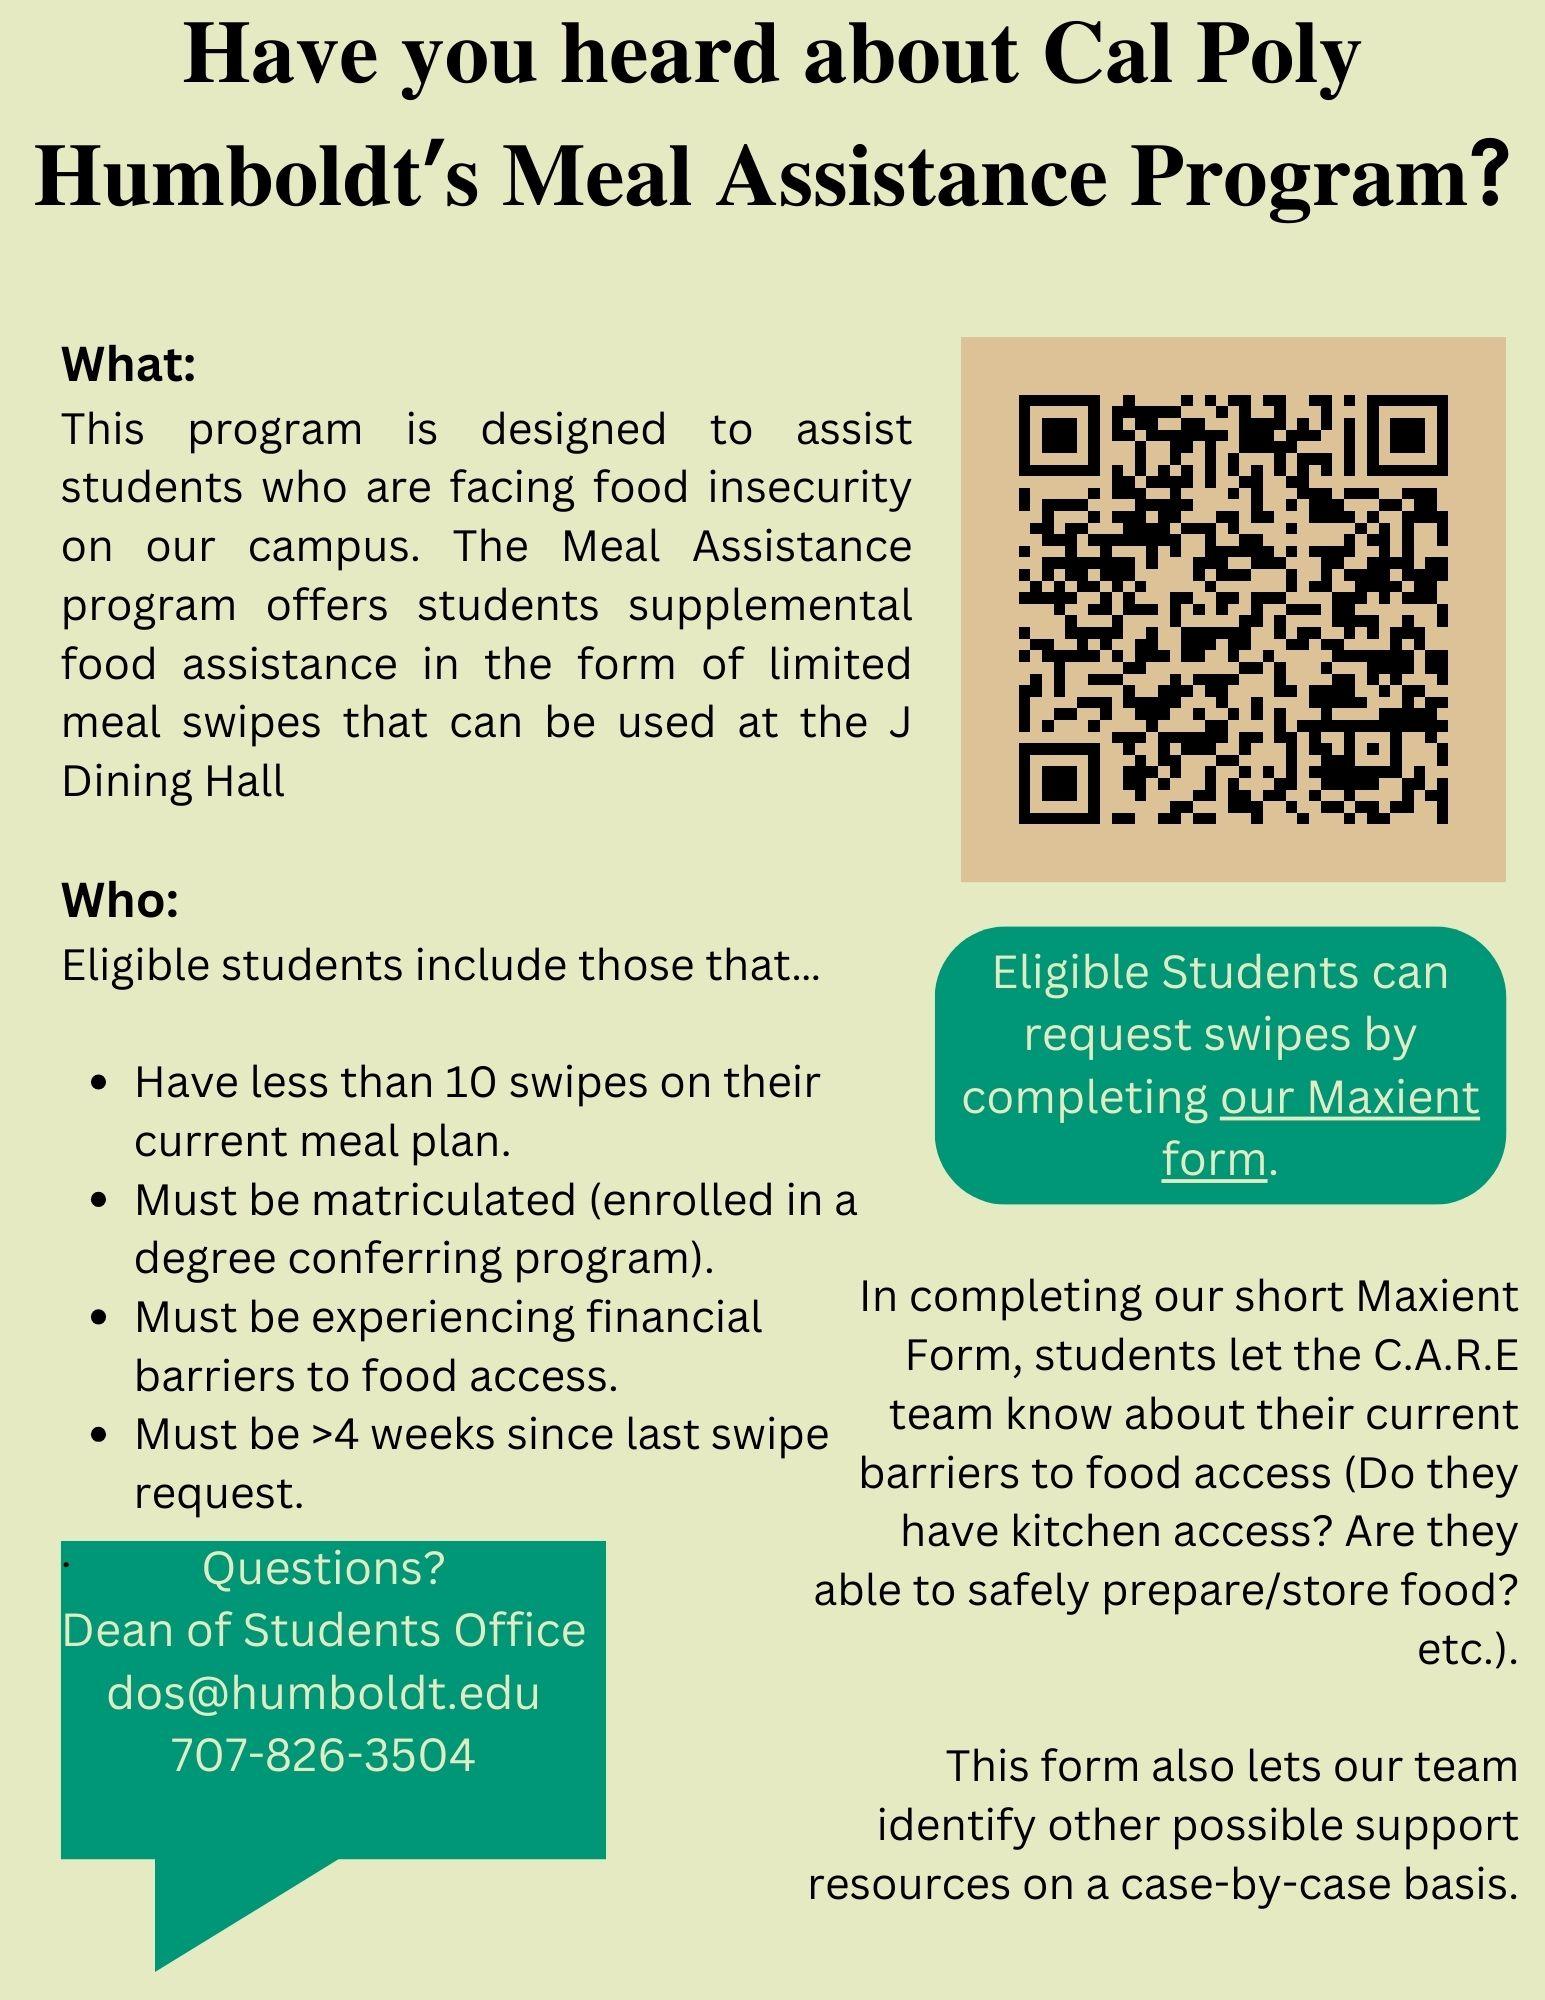 What:  This program is designed to assist students who are facing food insecurity on our campus. The Meal Assistance program offers students supplemental food assistance in the form of limited meal swipes that can be used at the J Dining Hall.